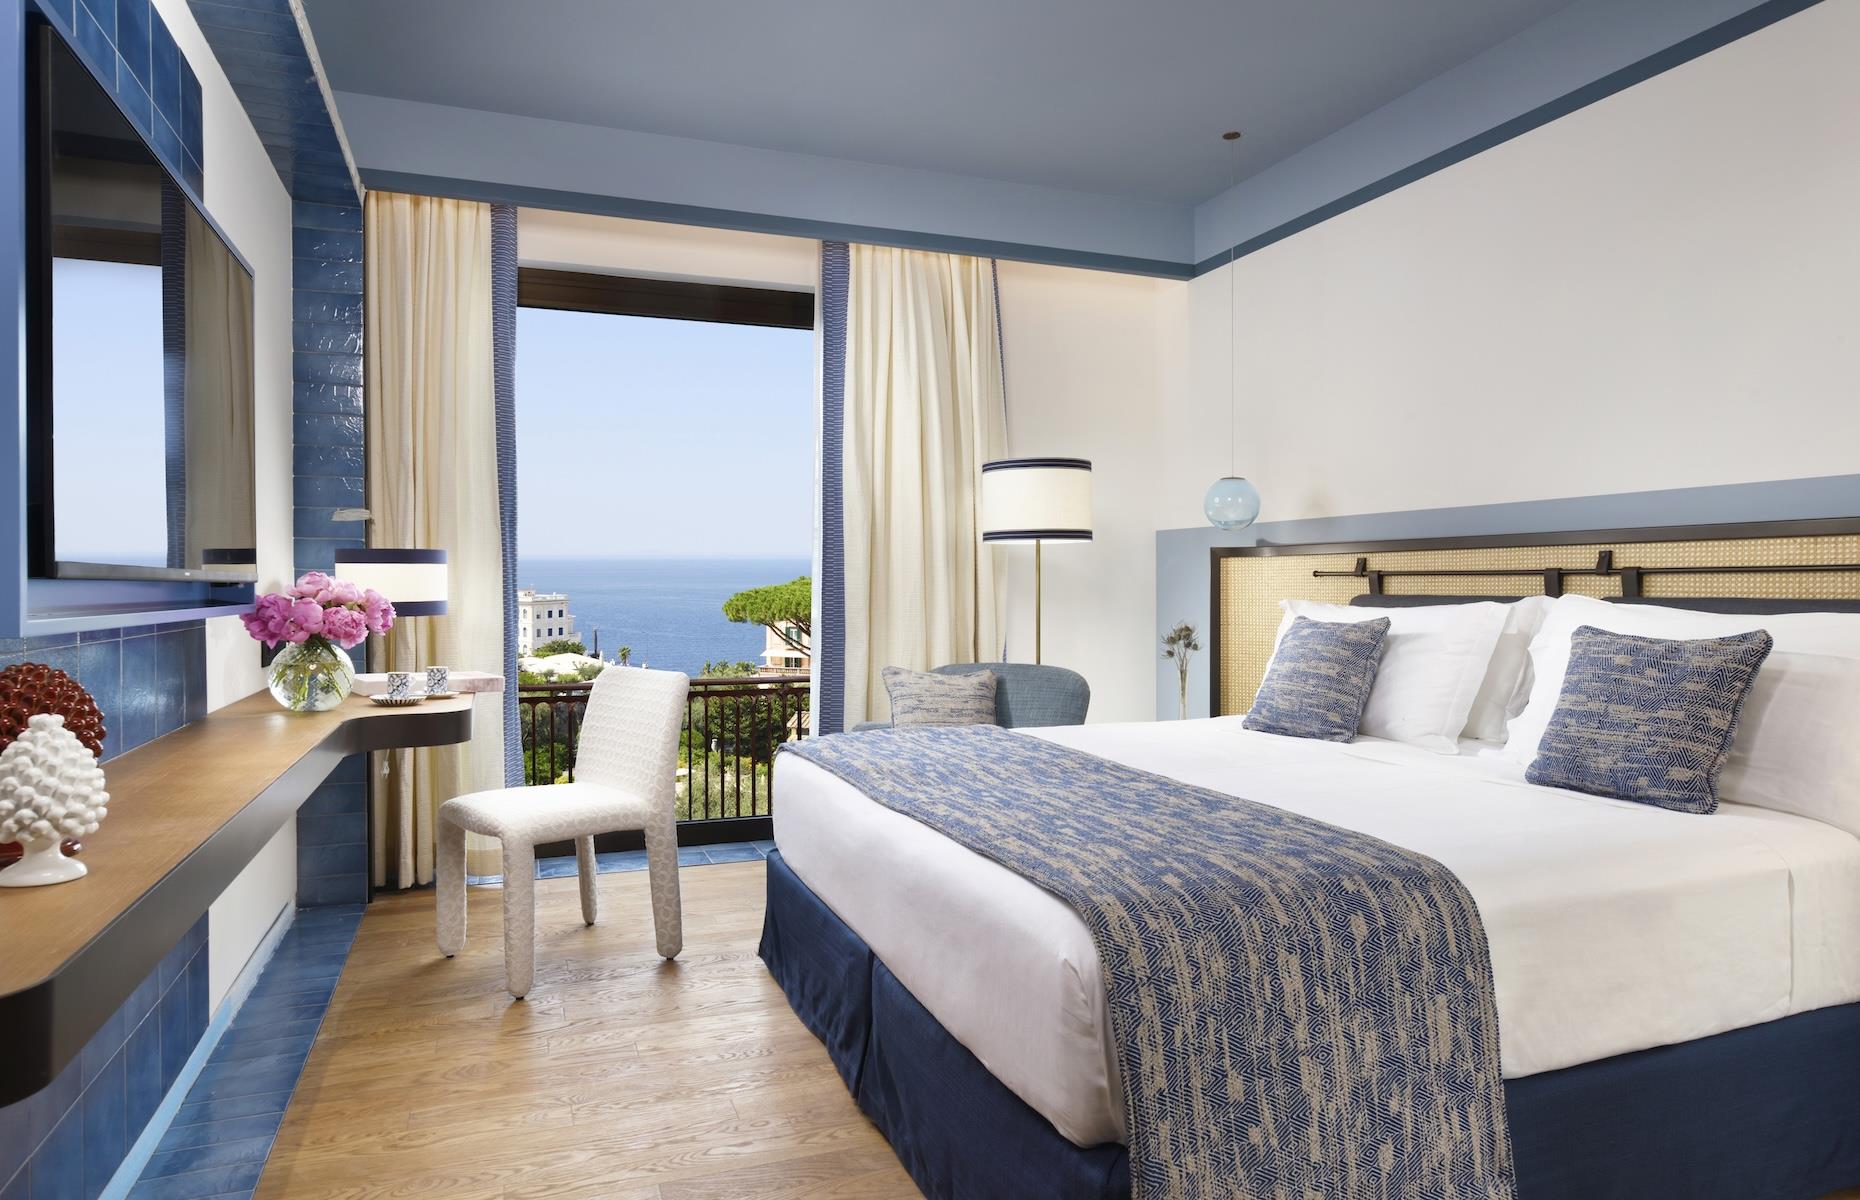 <p>As if we needed another reason to add the Amalfi Coast to our must-visit list... Ara Maris Sorrento is set to lure guests to the seaside city when it opens on the lemon-scented coastline in spring. A short hop from Sorrento’s pretty Piazza Tasso, the 49-room hotel – part of Preferred Hotels & Resorts’ L.V.X. Collection – will have some of the best views in town. All rooms have a balcony for enjoying sun-drenched views across the deep blue Bay of Naples and brooding Mount Vesuvius. Its rooftop Lumi Sky Lounge will be the place to be at aperitivo time. </p>